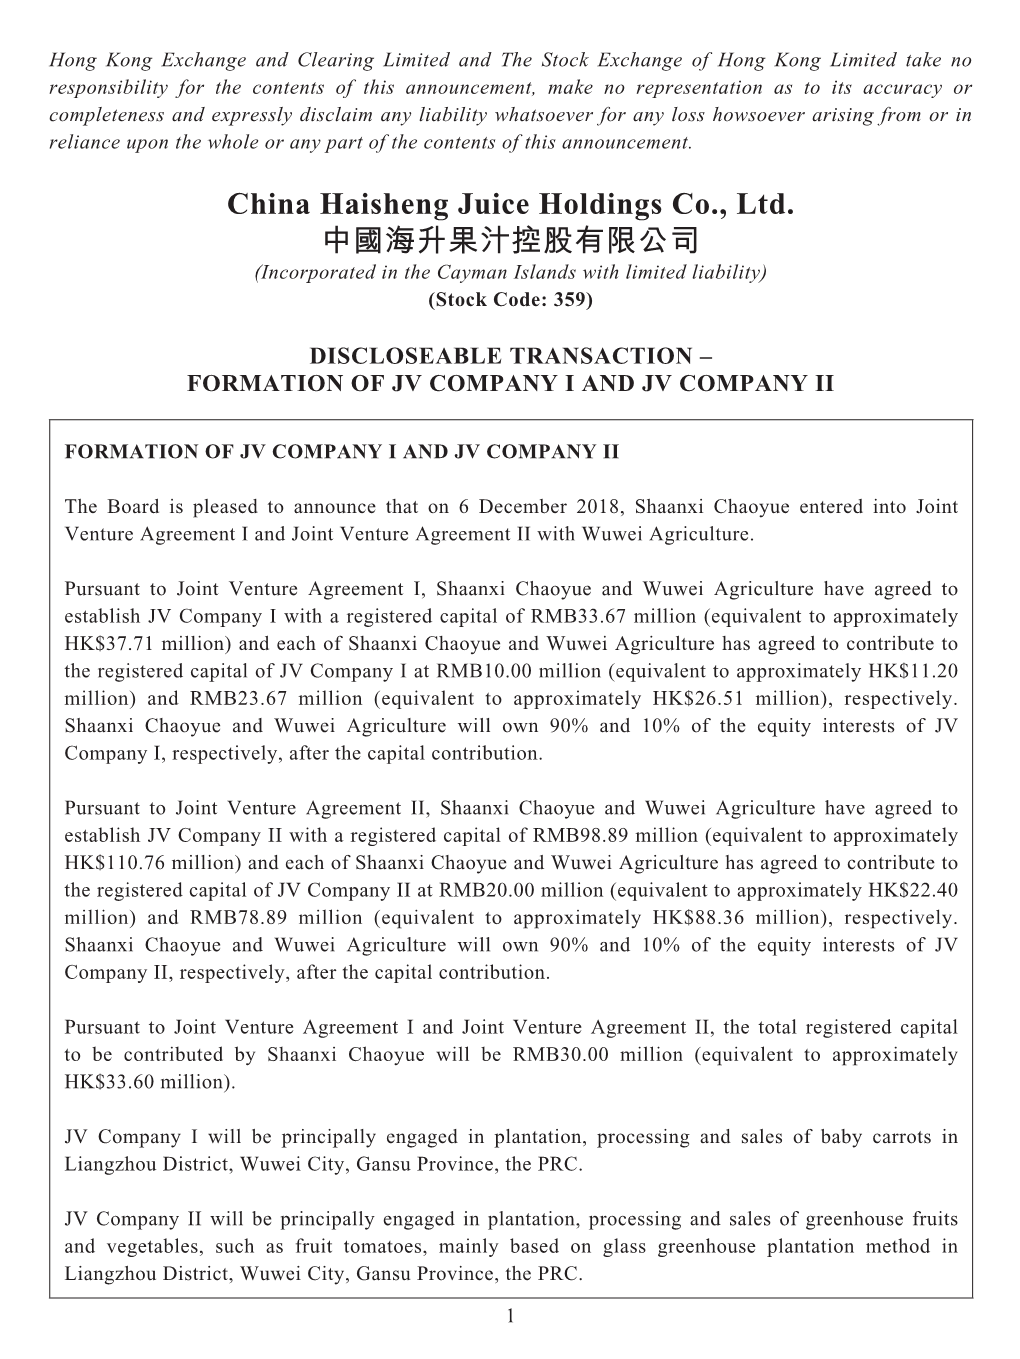 China Haisheng Juice Holdings Co., Ltd. 中國海升果汁控股有限公司 (Incorporated in the Cayman Islands with Limited Liability) (Stock Code: 359)